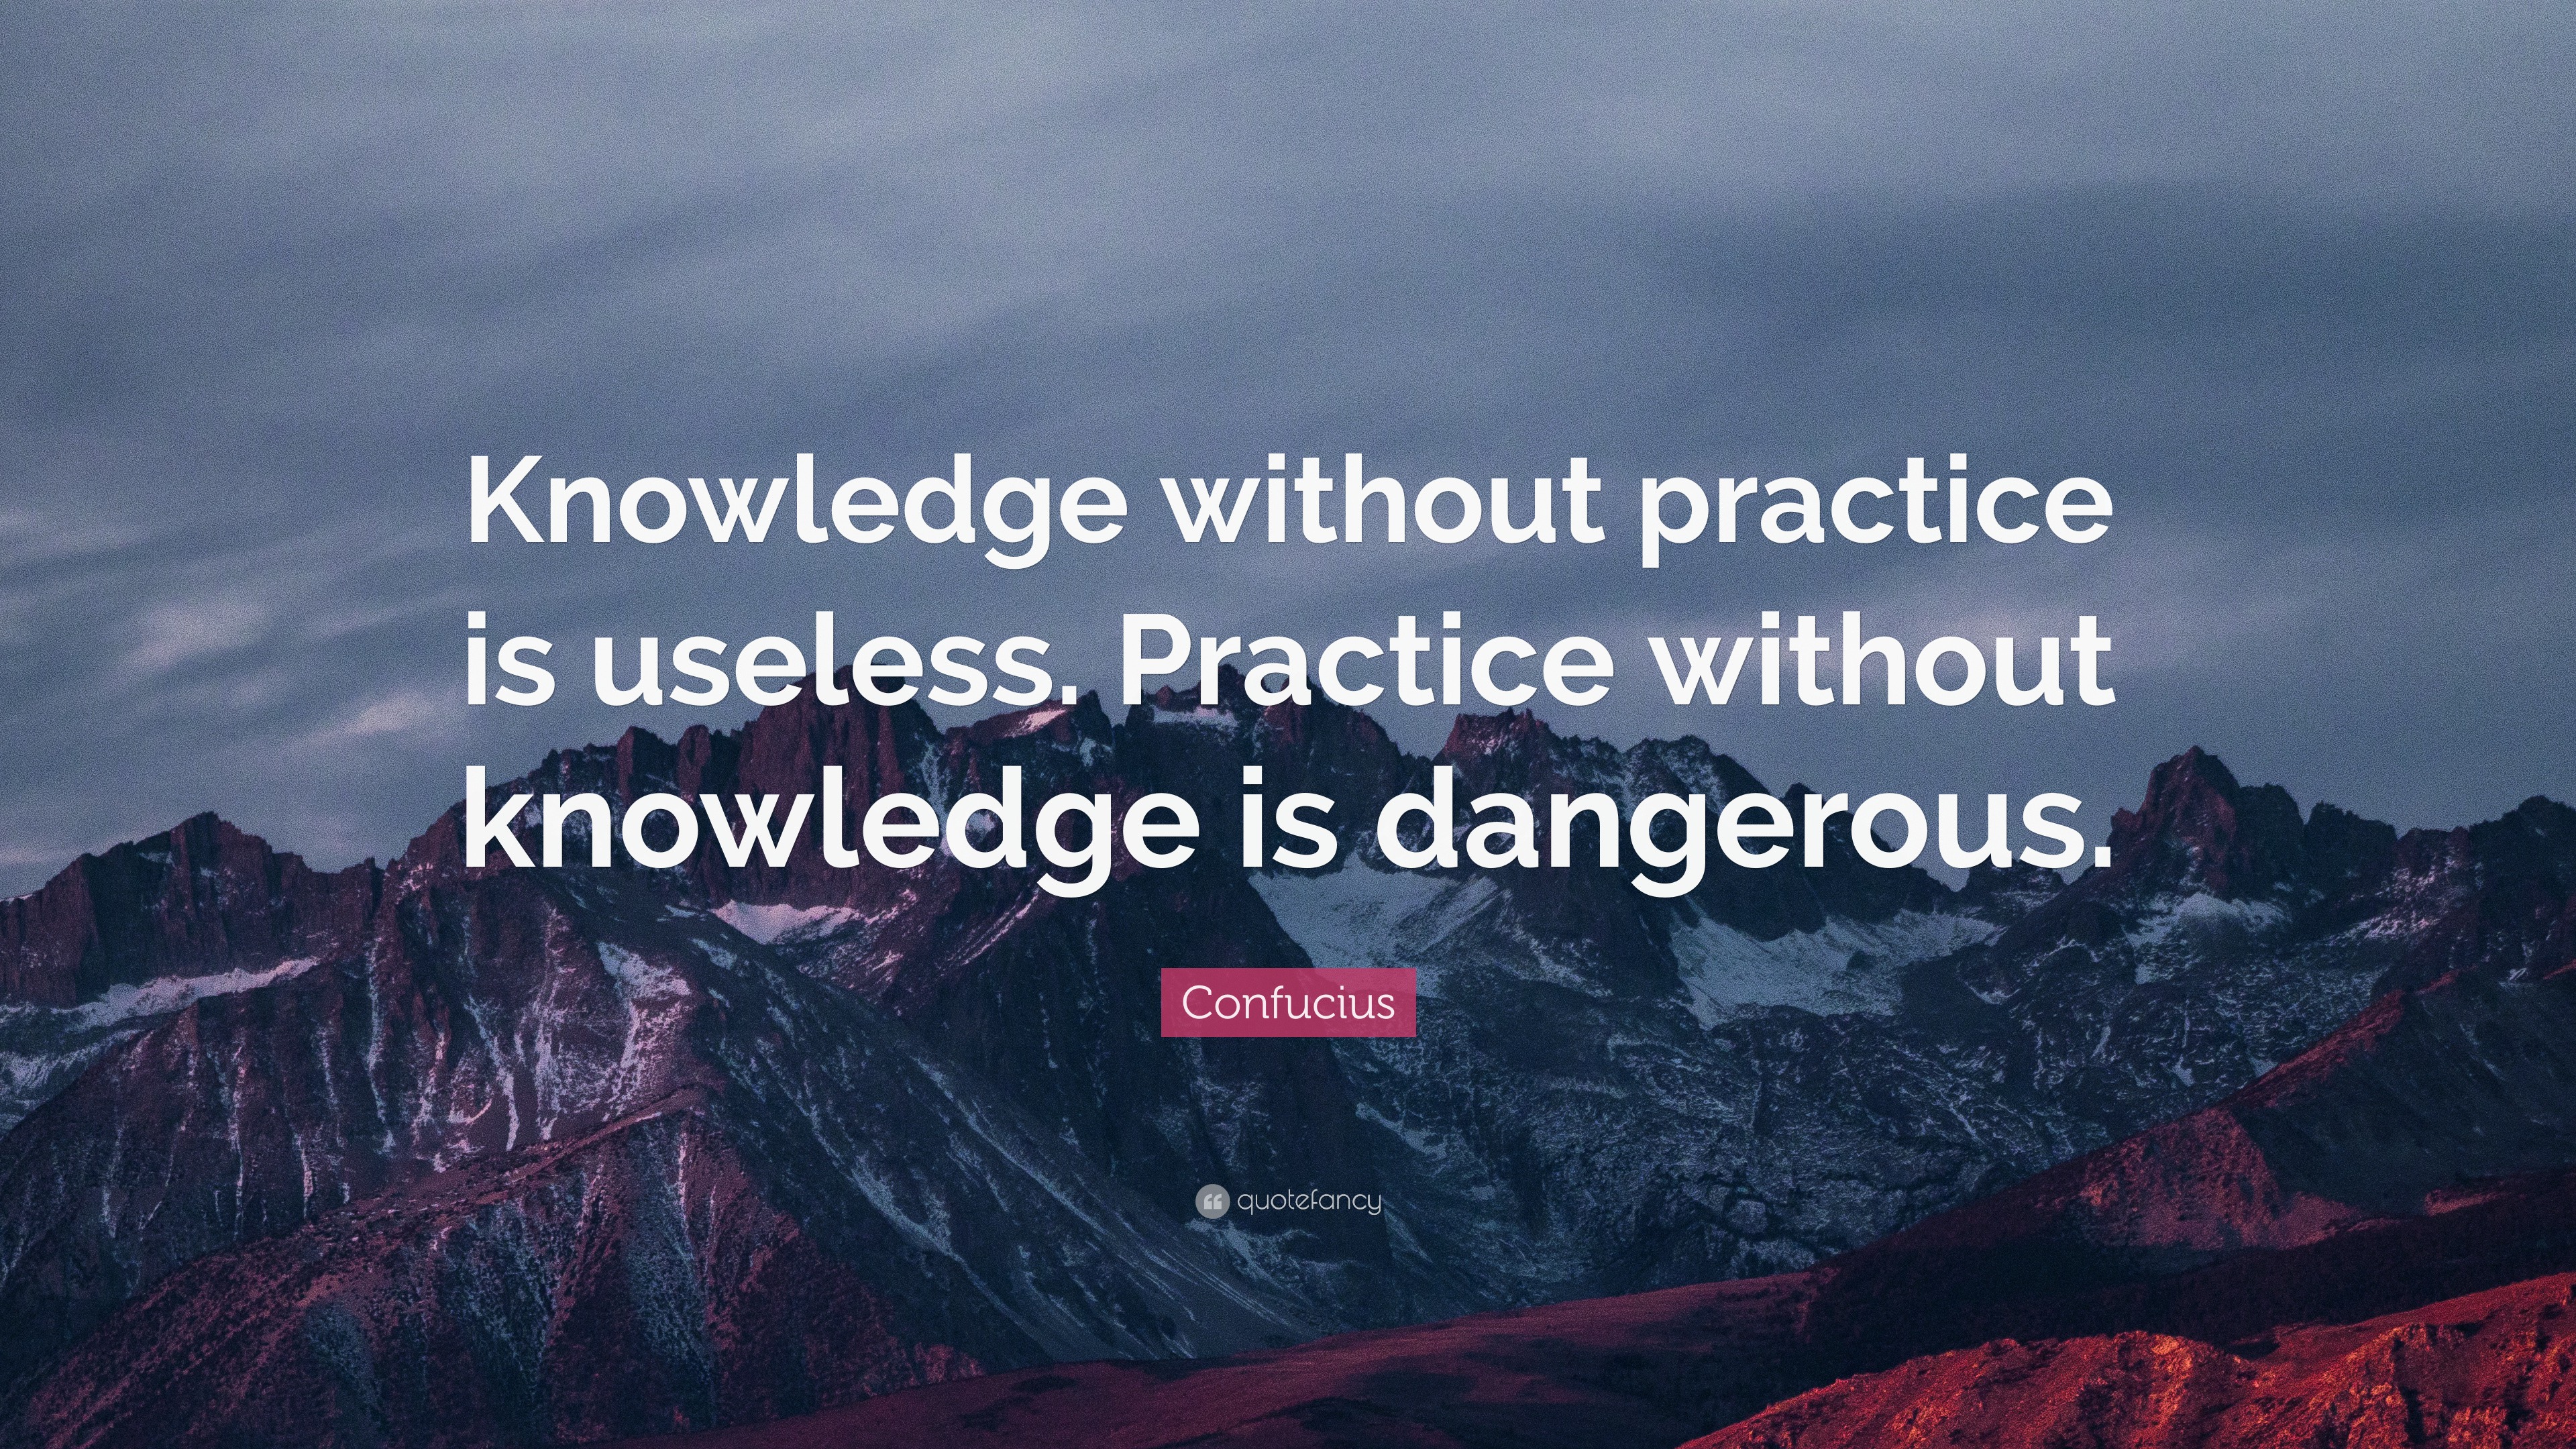 Confucius Quote “Knowledge without practice is useless